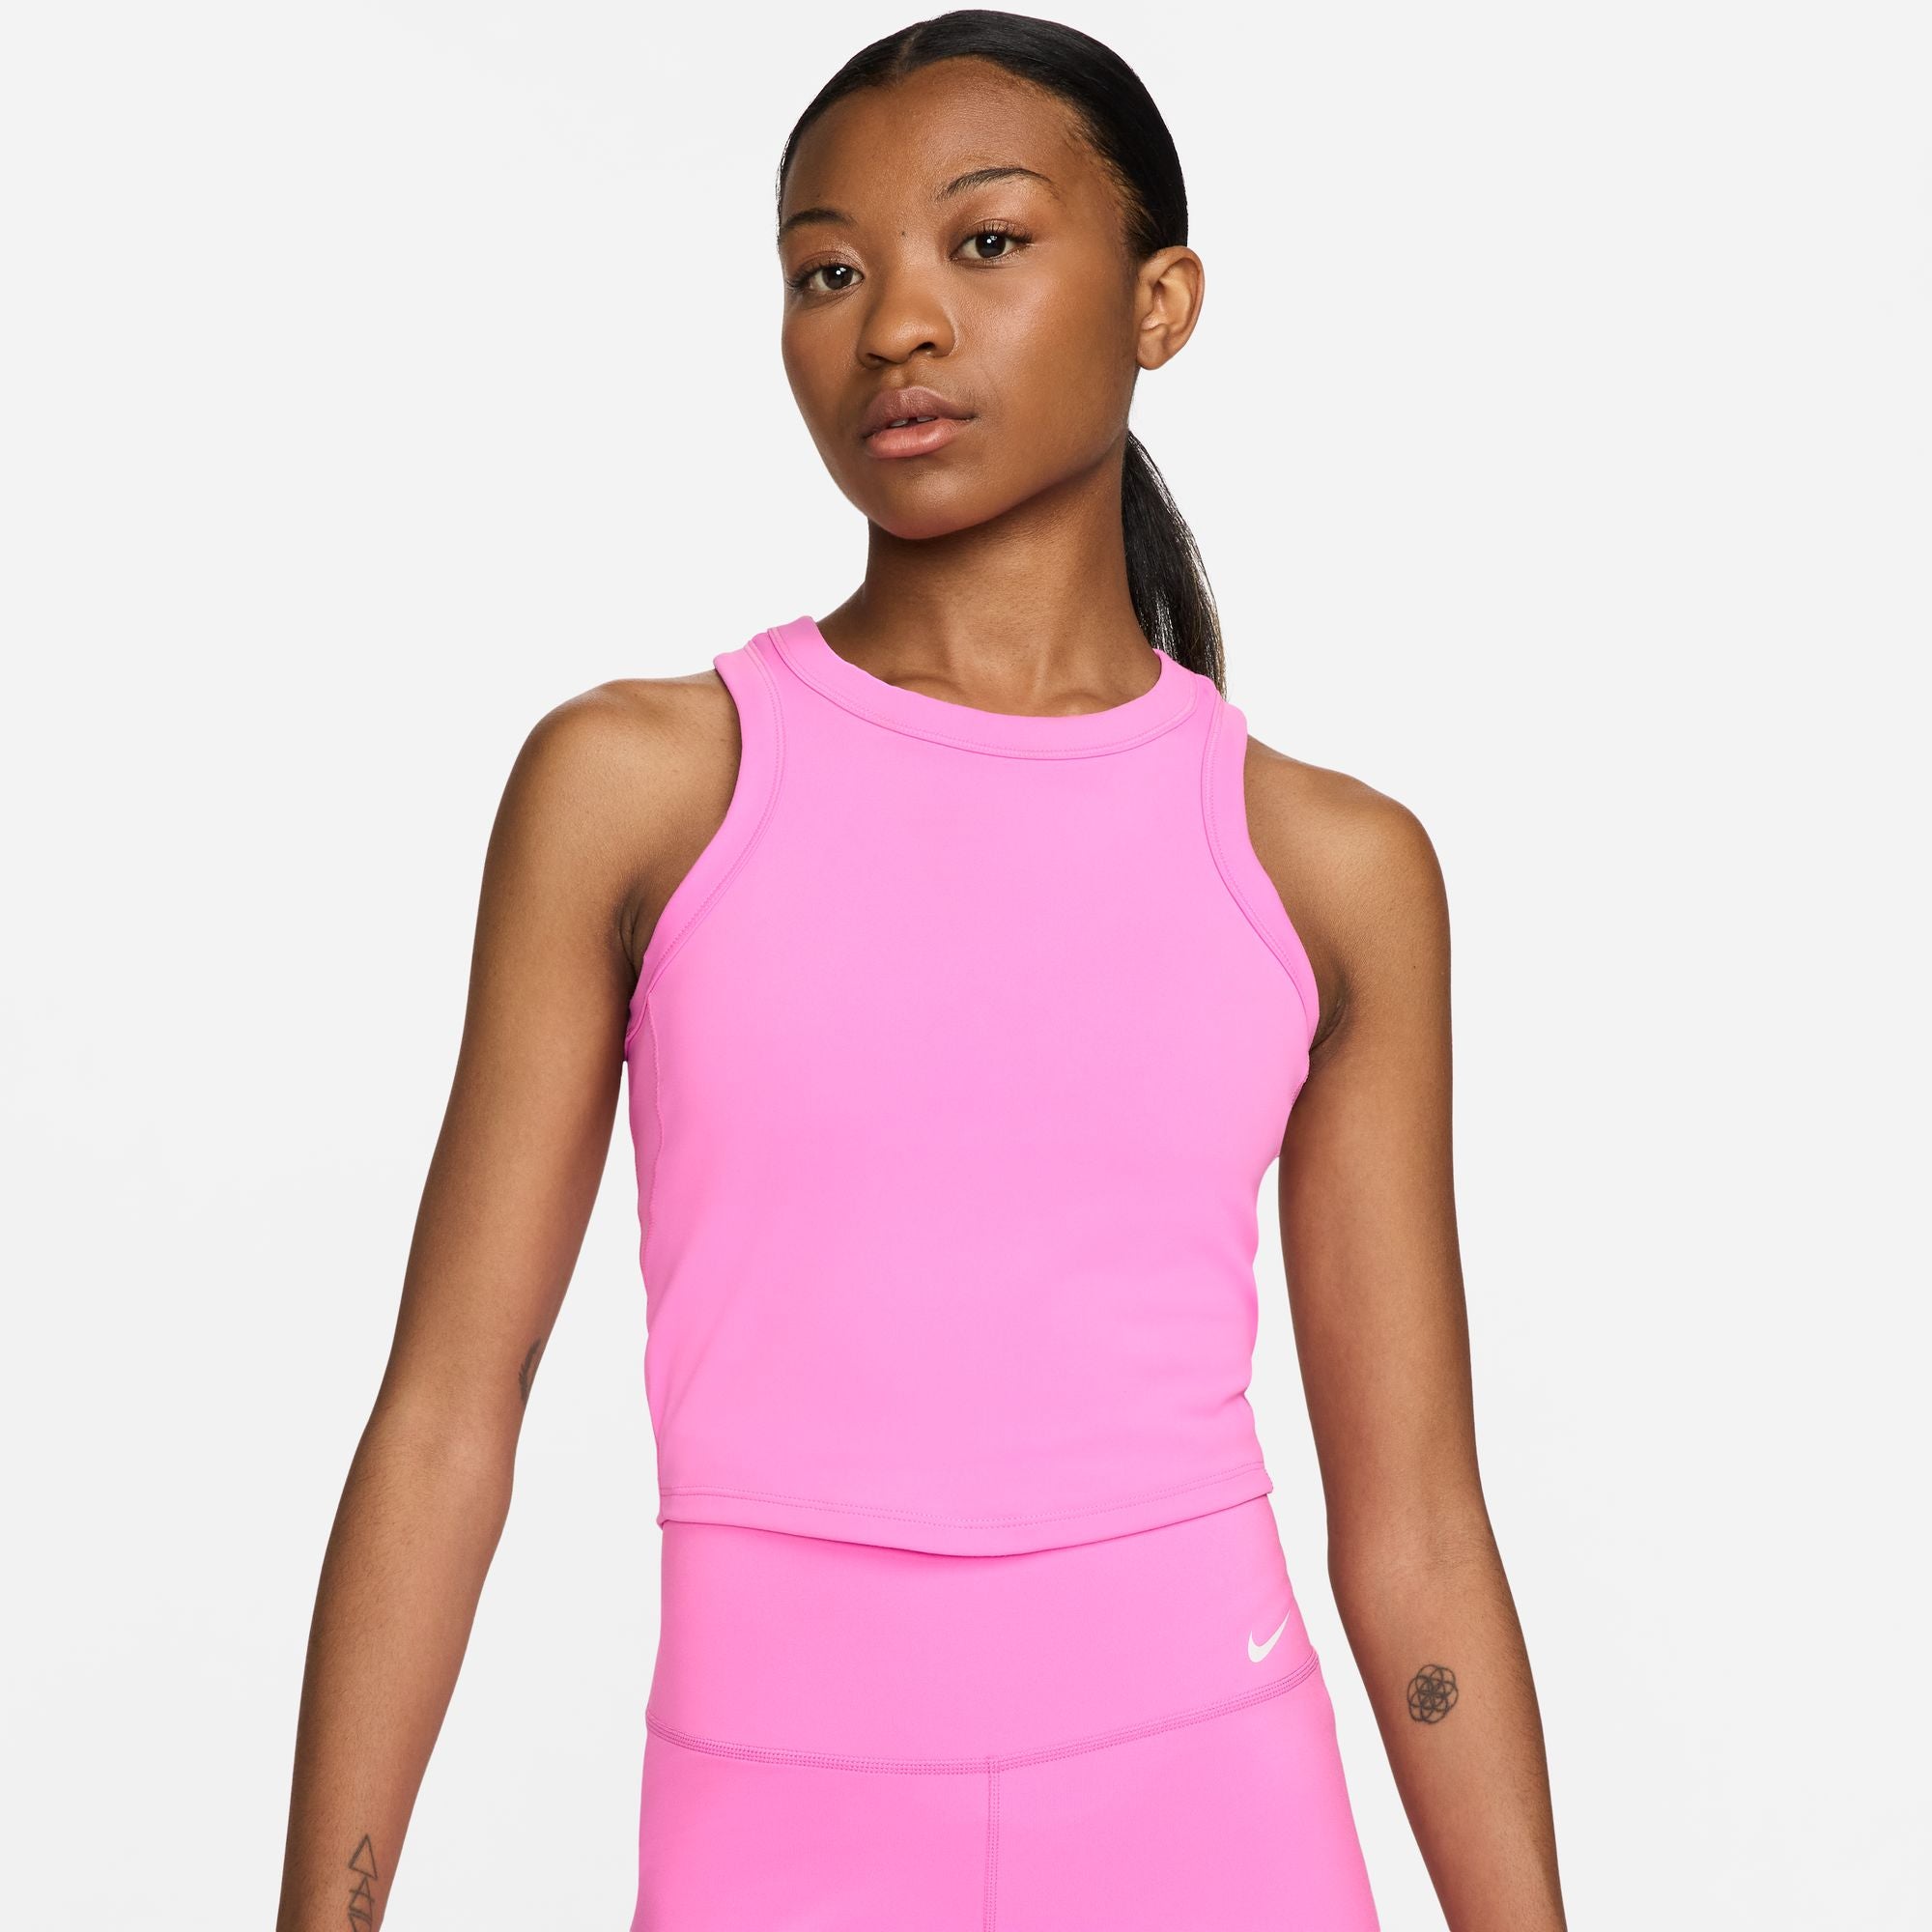 NIKE WOMEN'S ONE FITTED TANK - 675 PLAYFUL PINK/BLACK XS